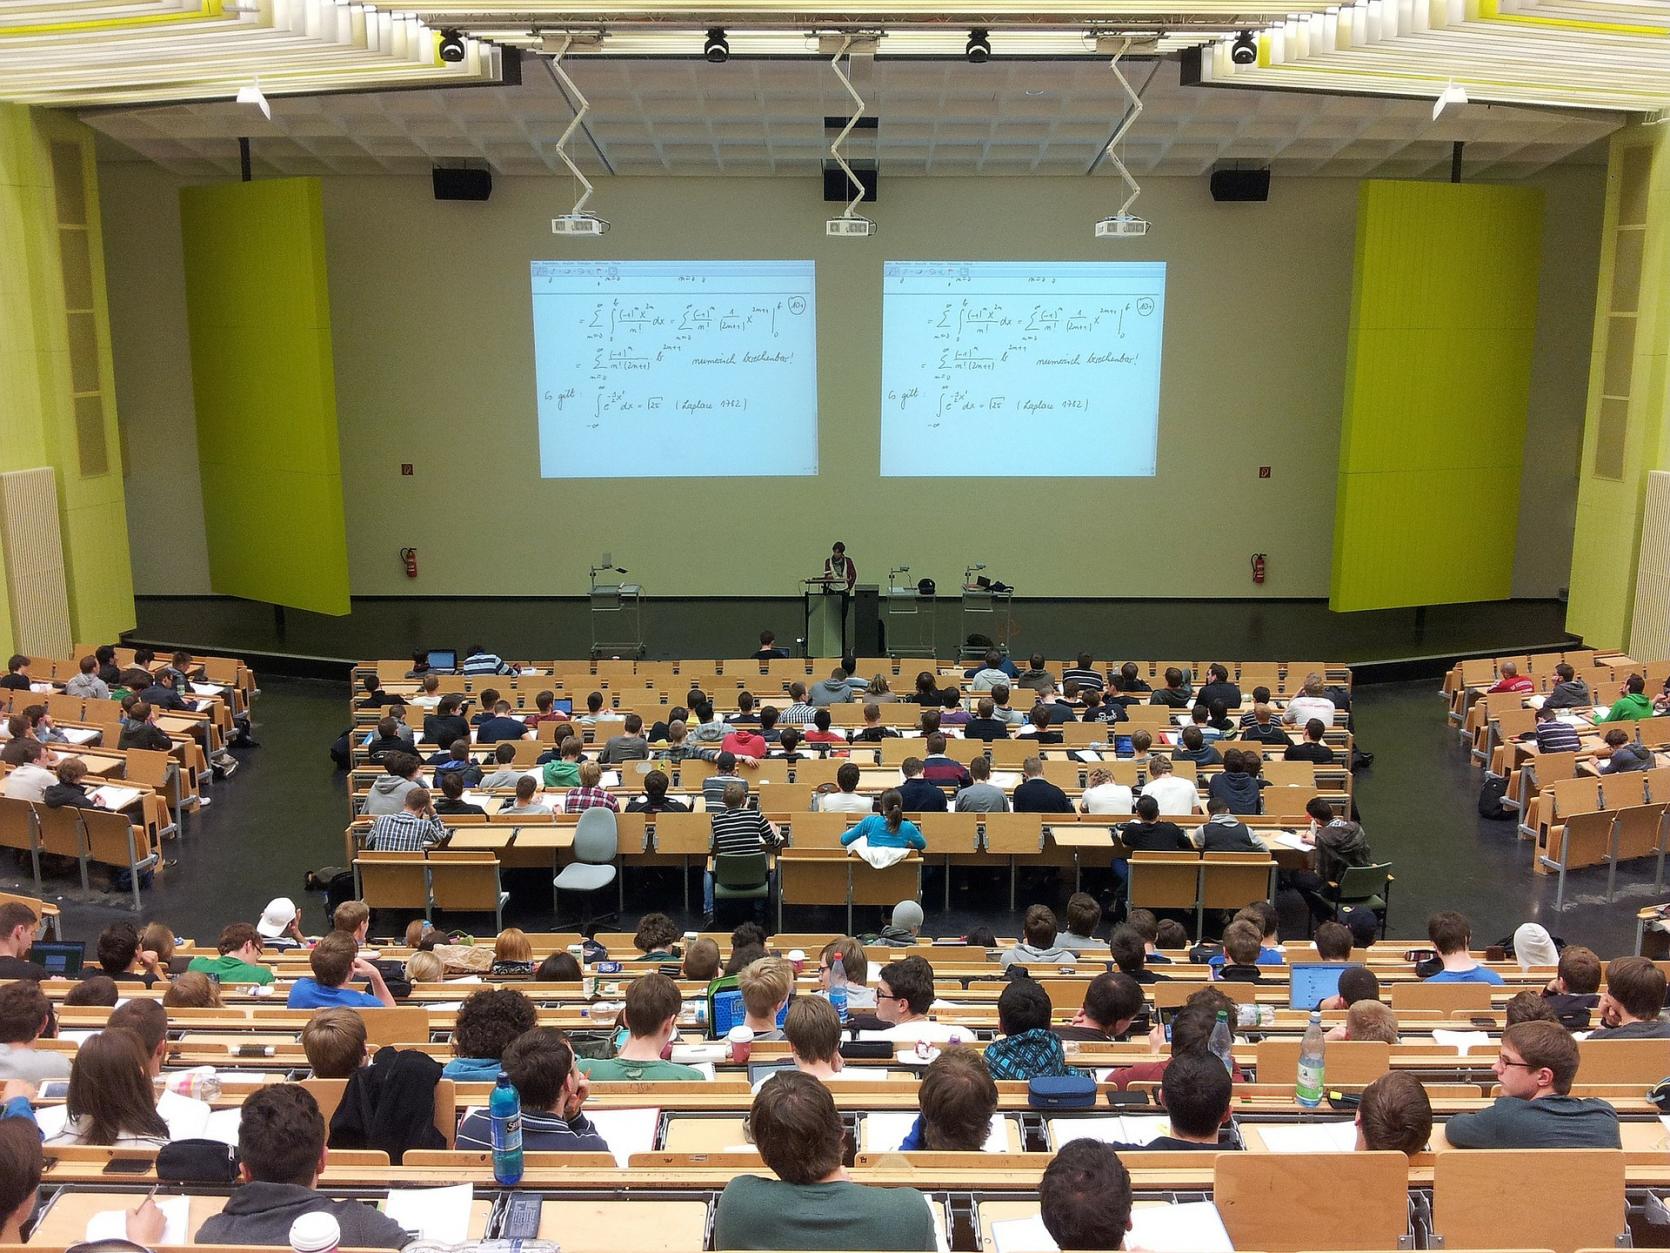 View from the back of a lecture hall full of students.